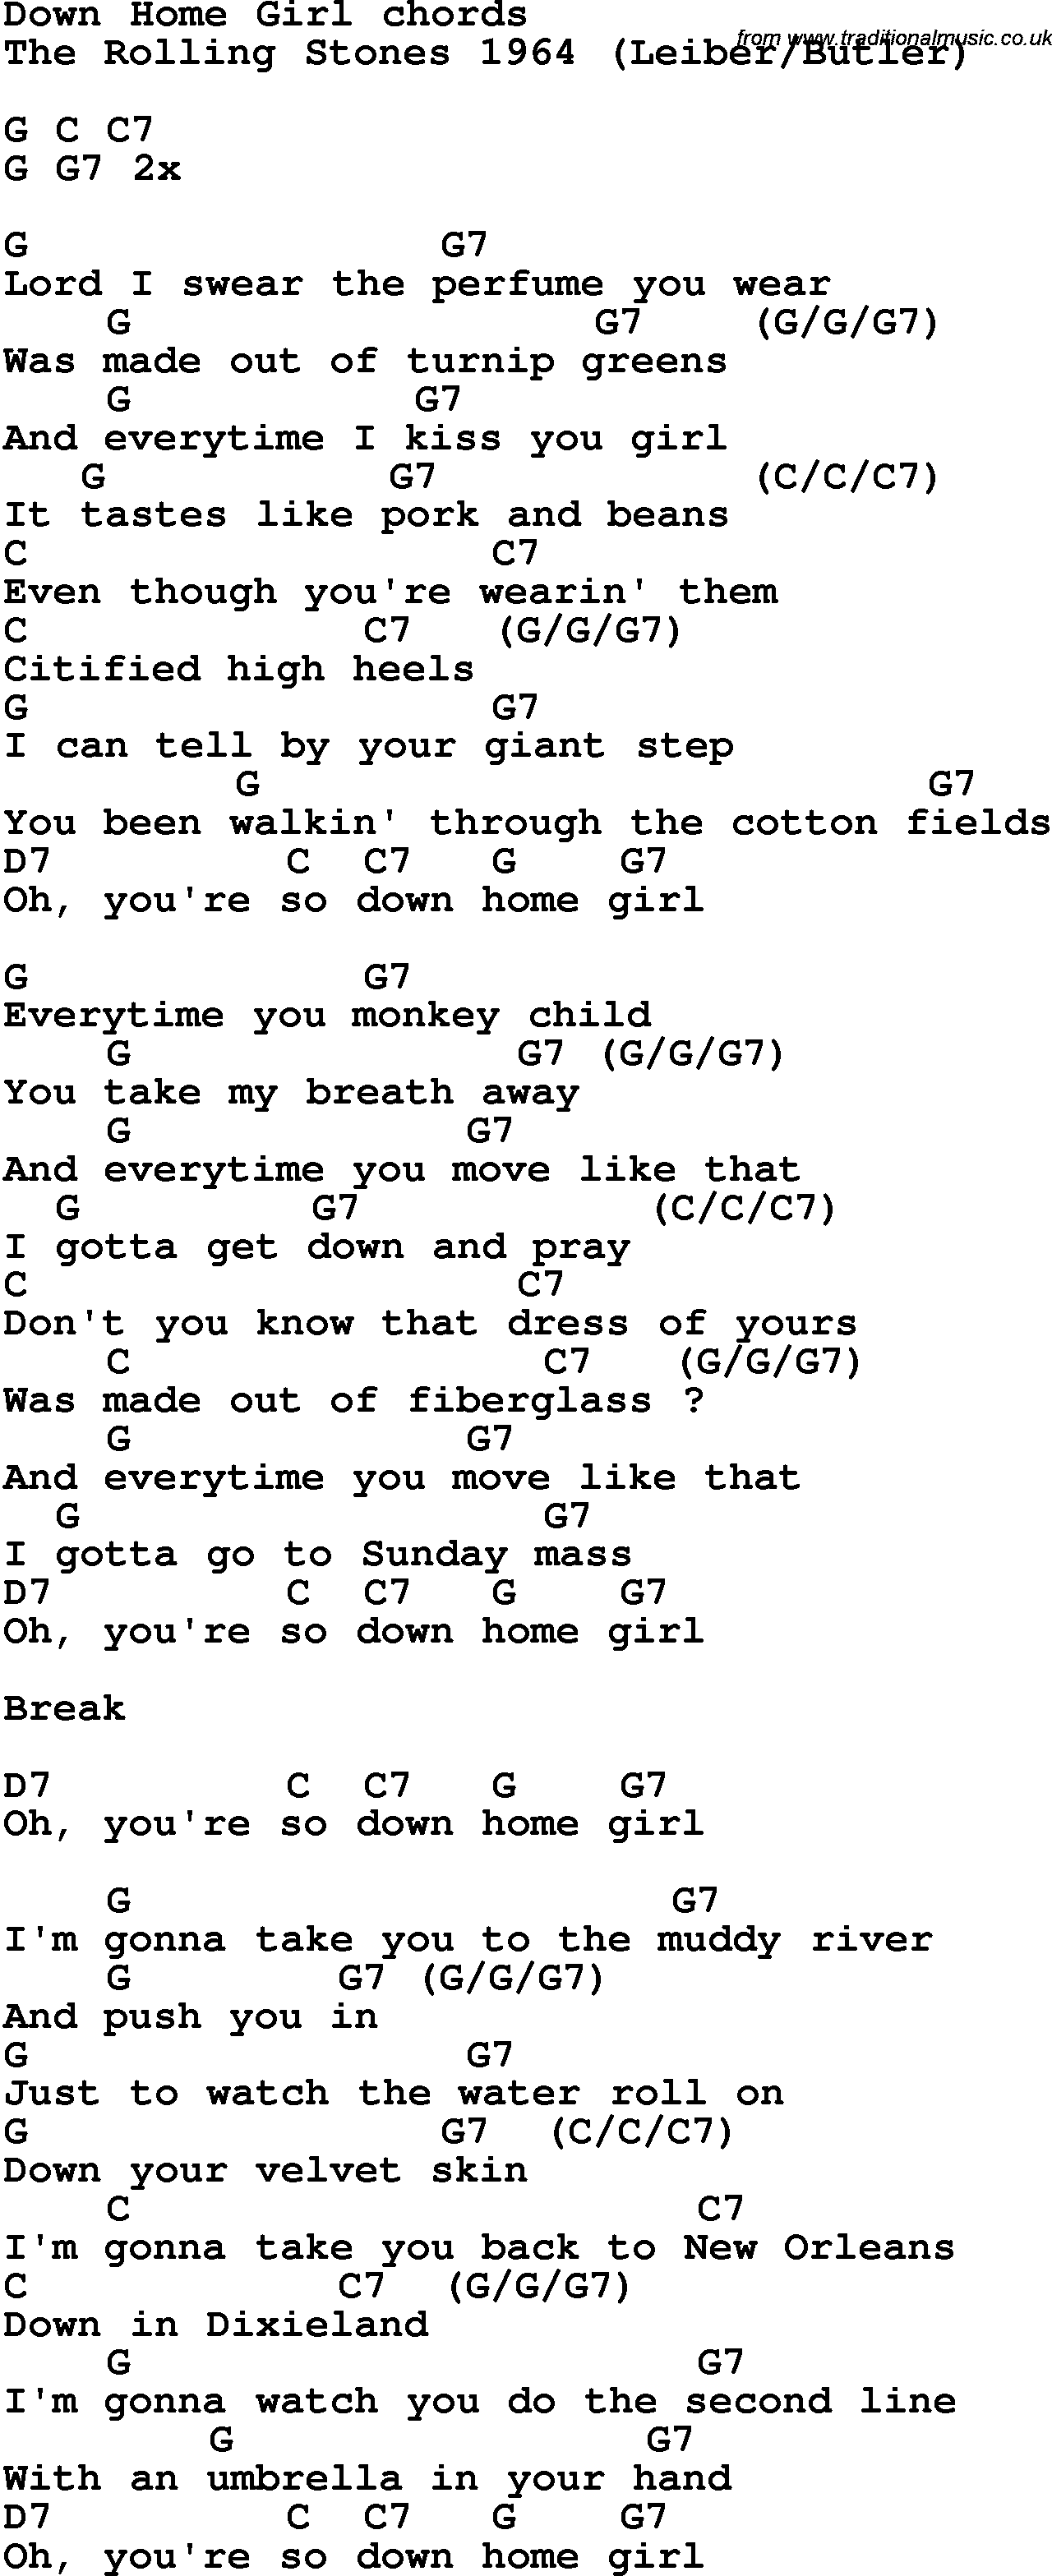 Song Lyrics with guitar chords for Down Home Girl